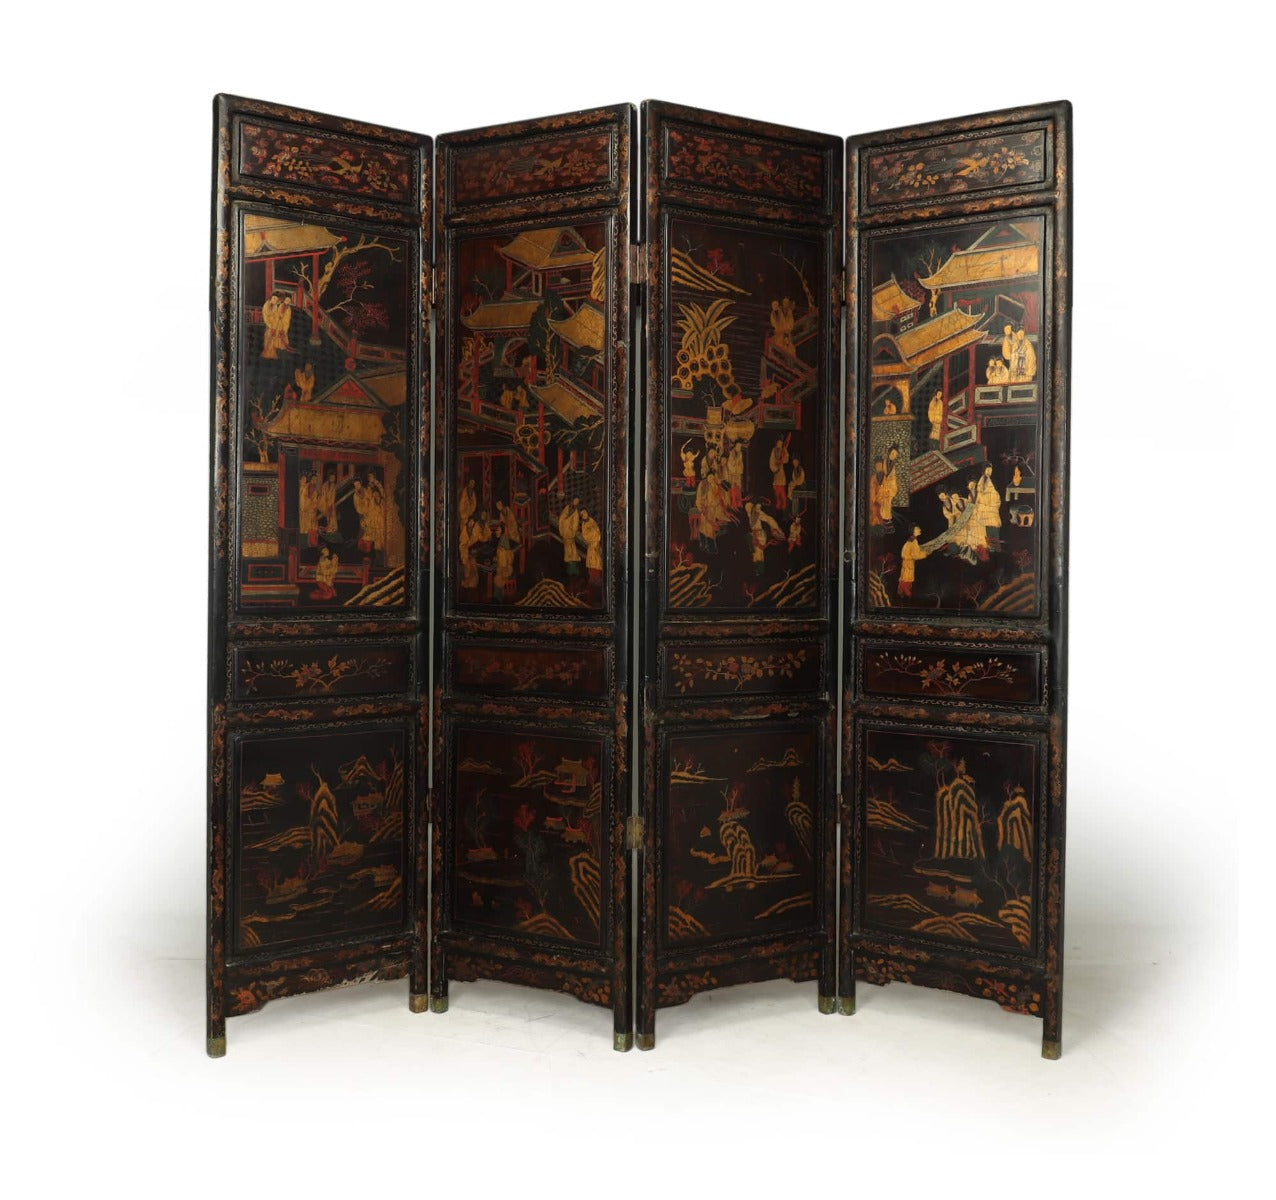 Fine Chinese Export Gilt and Black Lacquer Screen